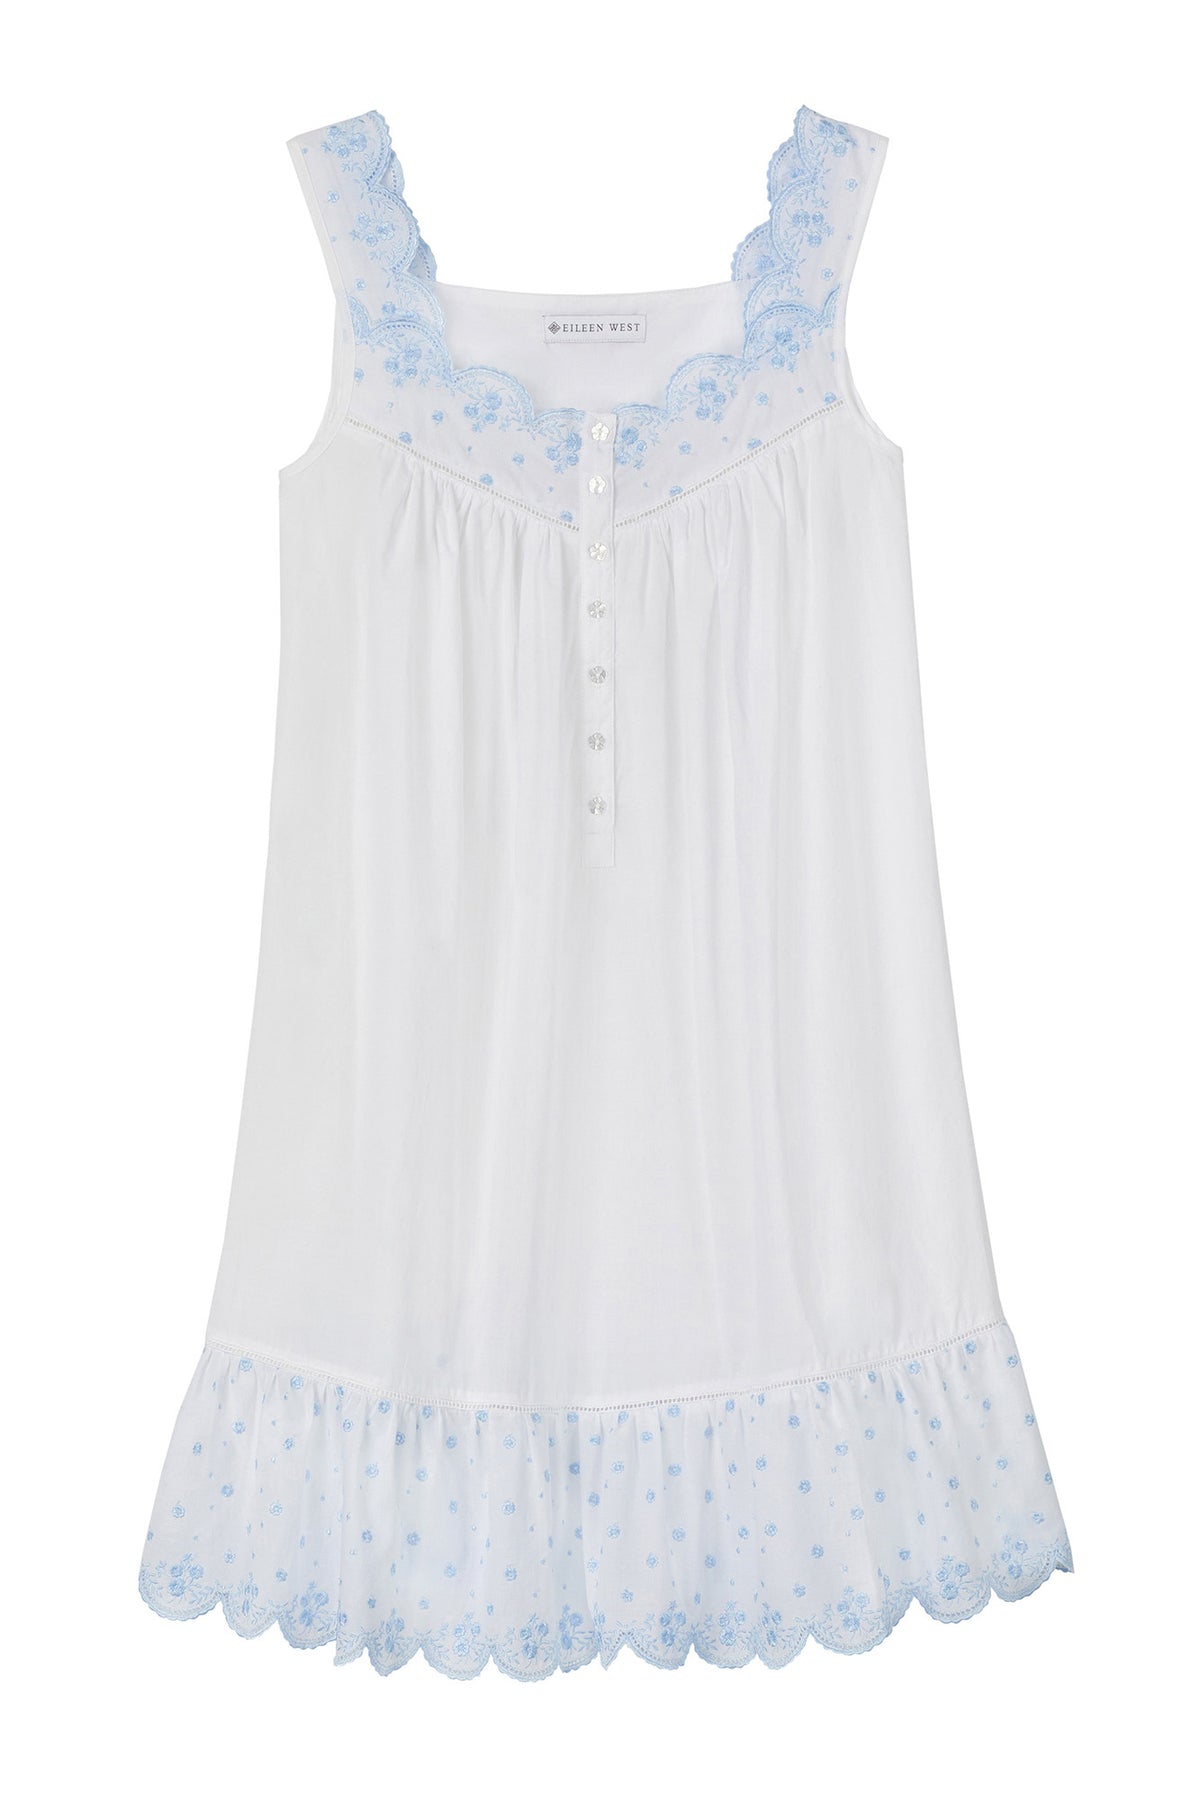 A lady wearing white sleeveless eileen scallop floral embroidery chemise.